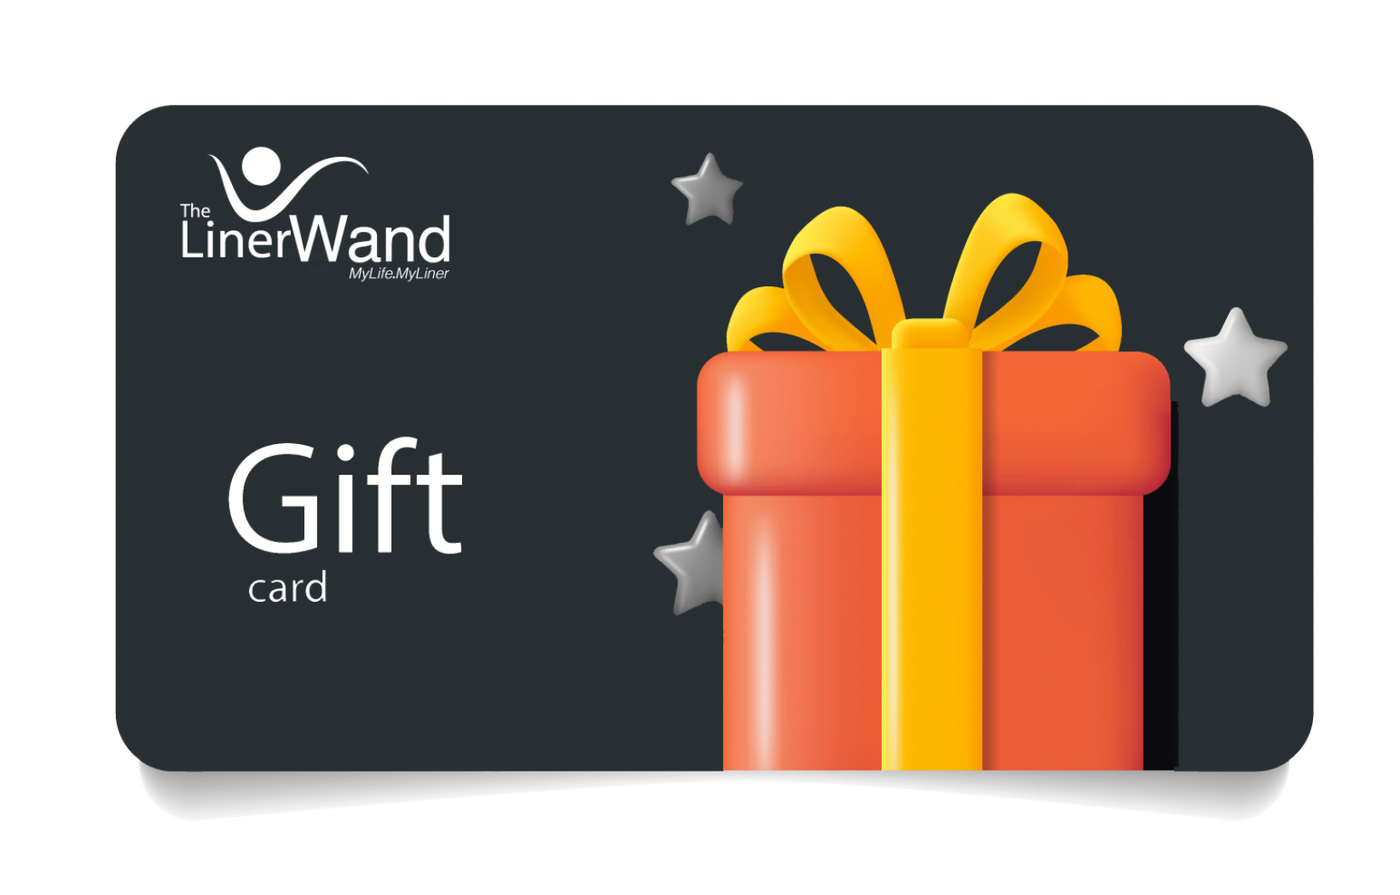 The Liner Wand Gift Card